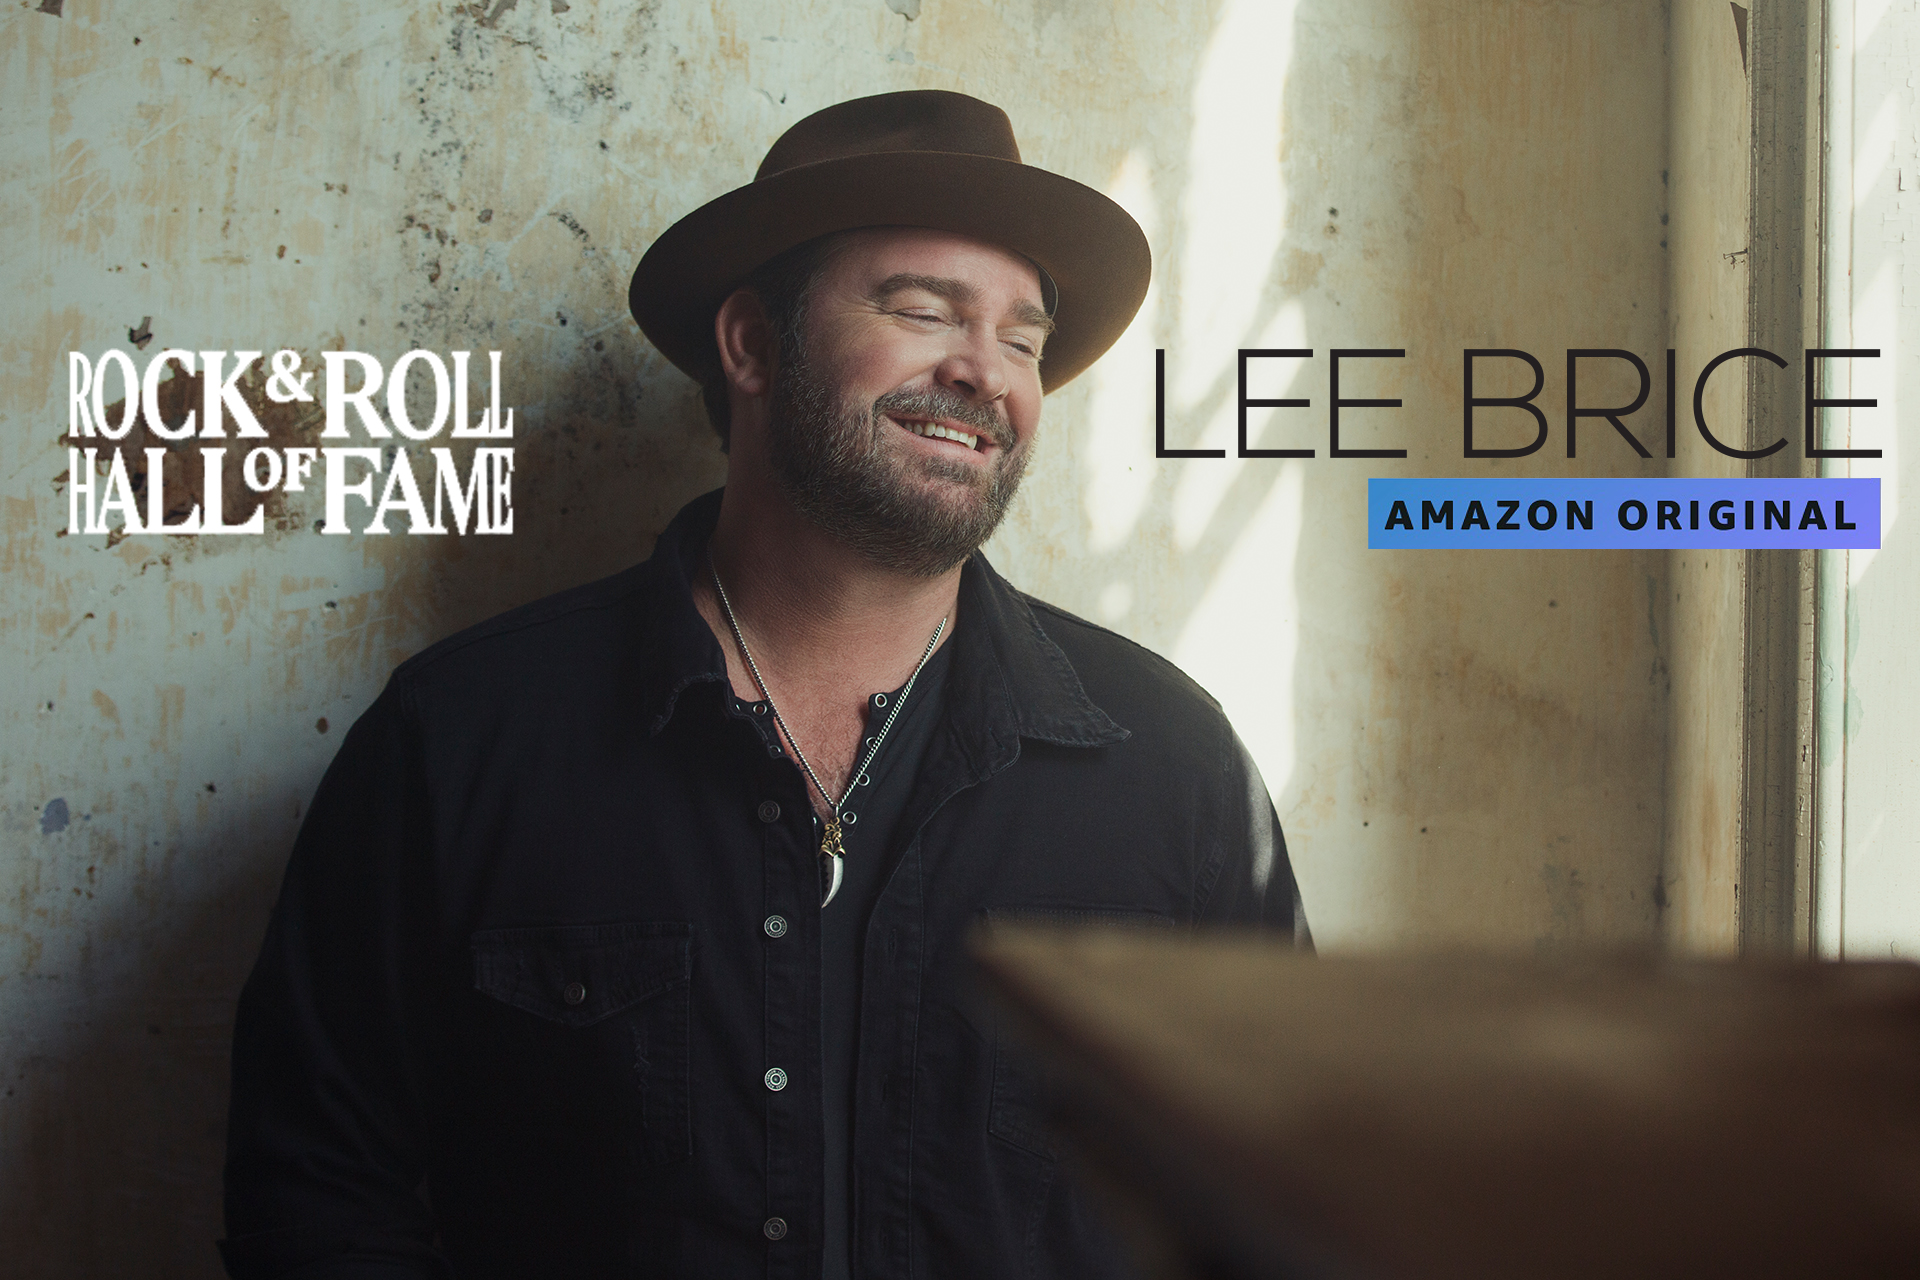 Lee Brice Honors Rock & Roll Hall of Fame Inductee Lionel Richie with His  Amazon Original Cover of “Hello” Available Now on Amazon Music – Curb |  Word Entertainment